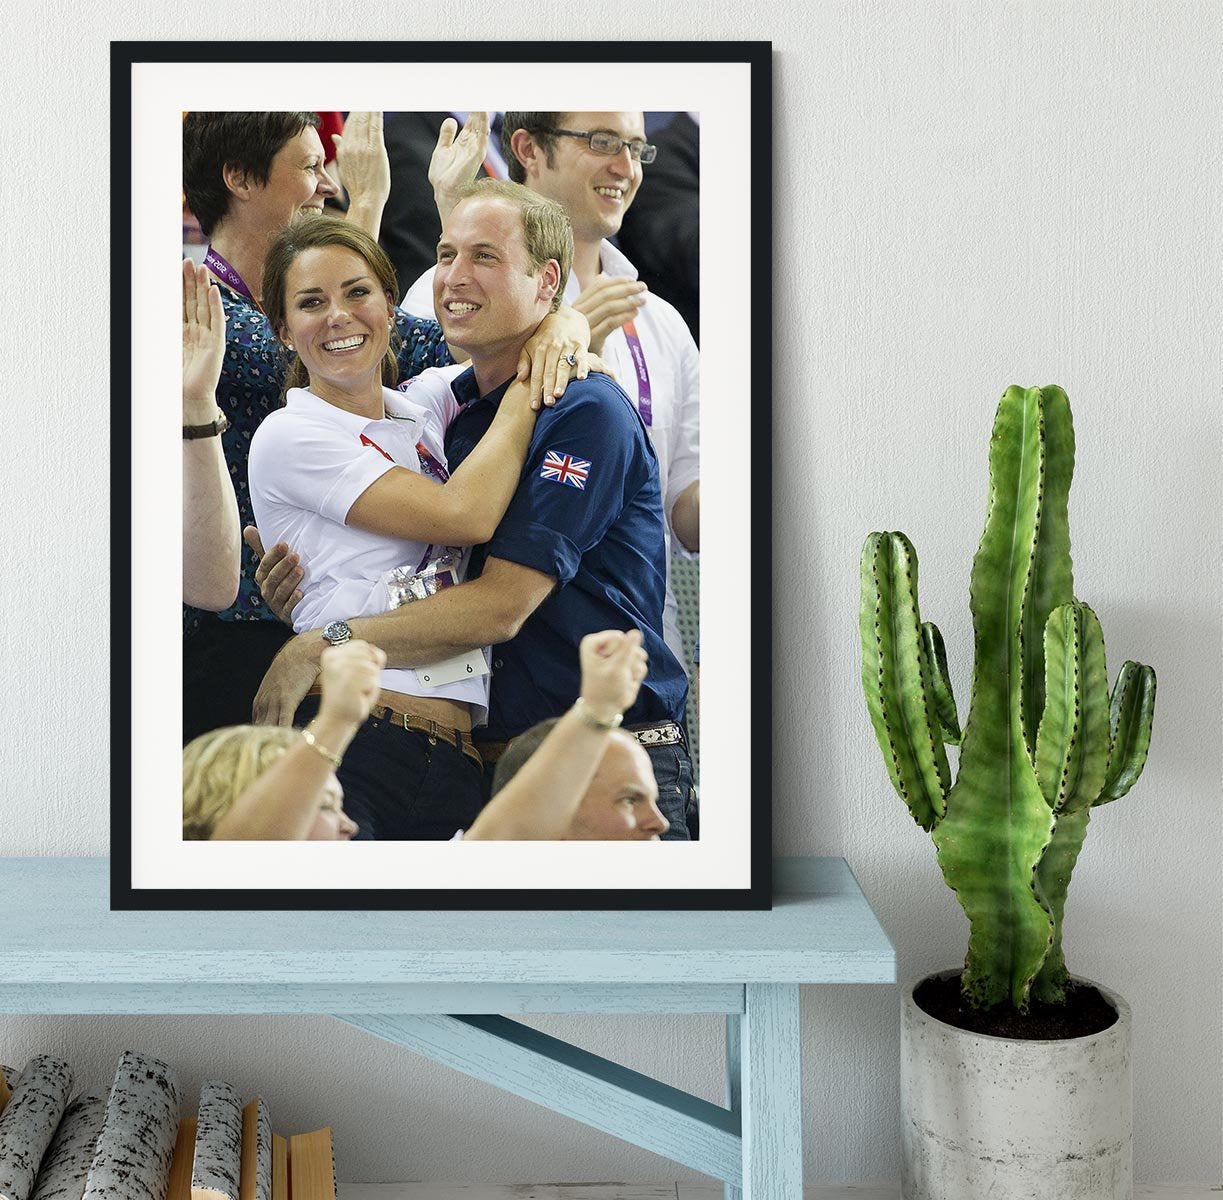 Prince William and Kate hugging at the 2012 Olympics Framed Print - Canvas Art Rocks - 1